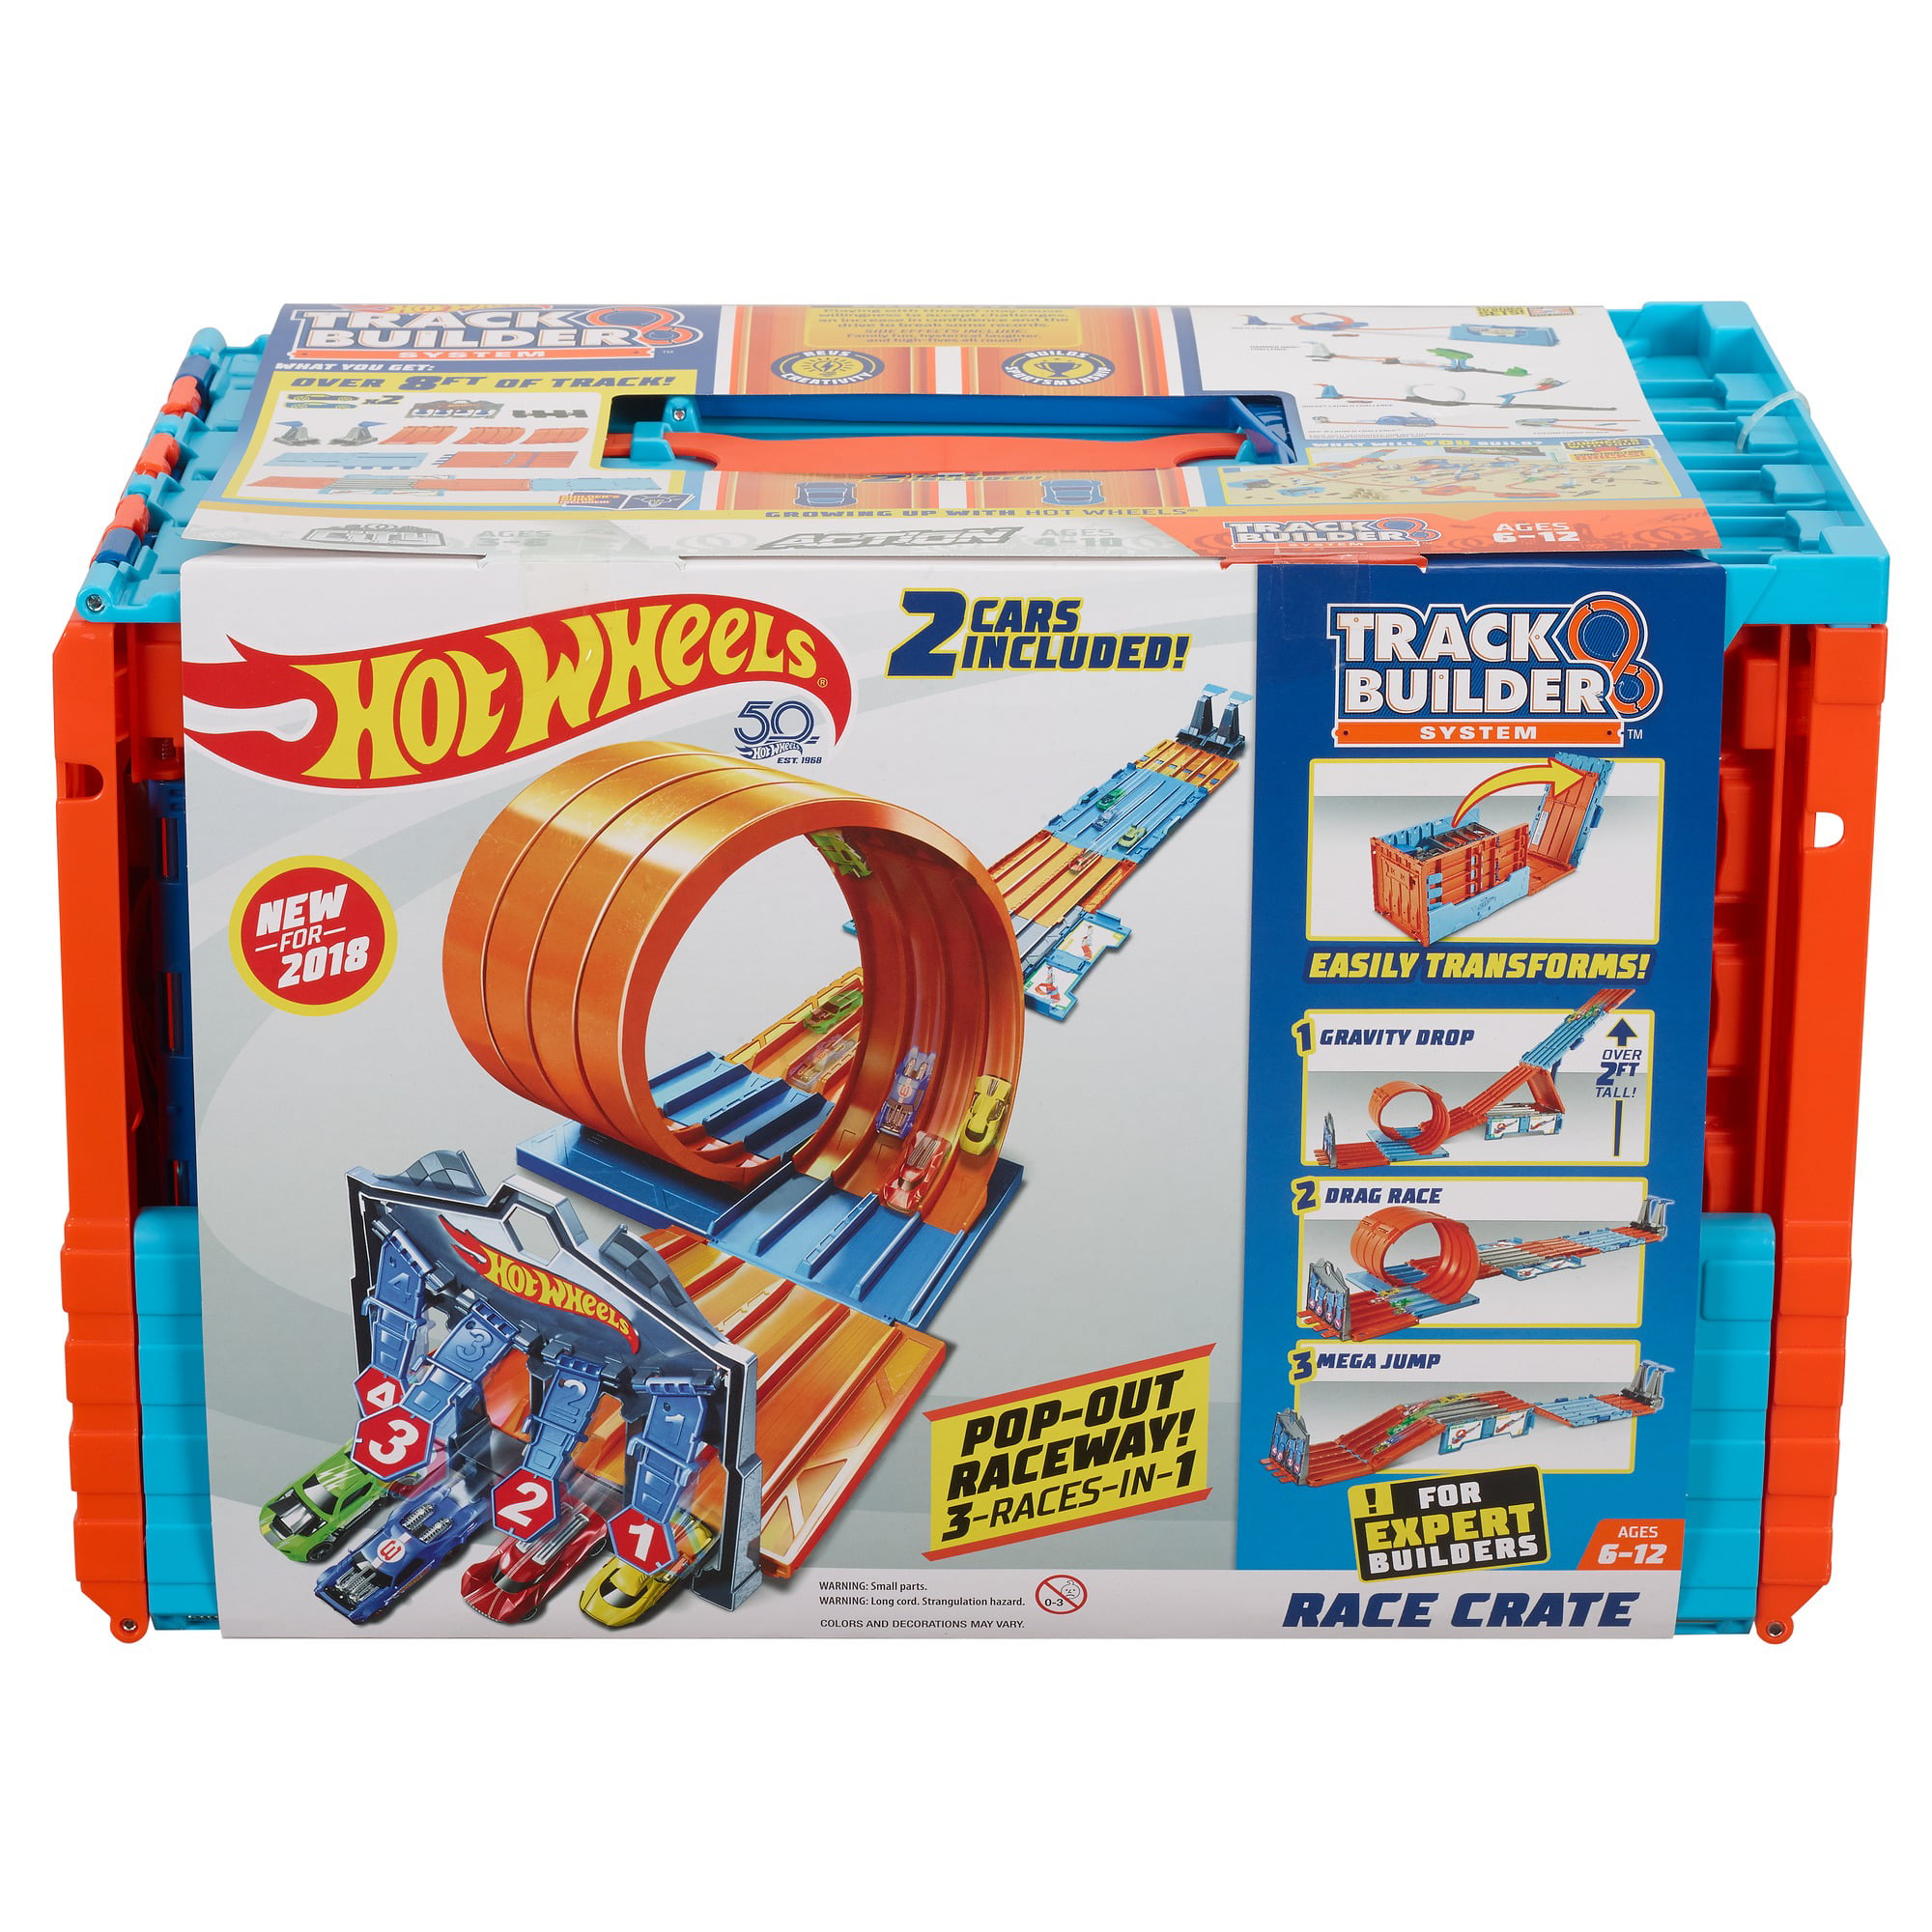 Details about   Hot Wheels Car Racing Track Builder System Race Crate Stunt Set Kids Playset 